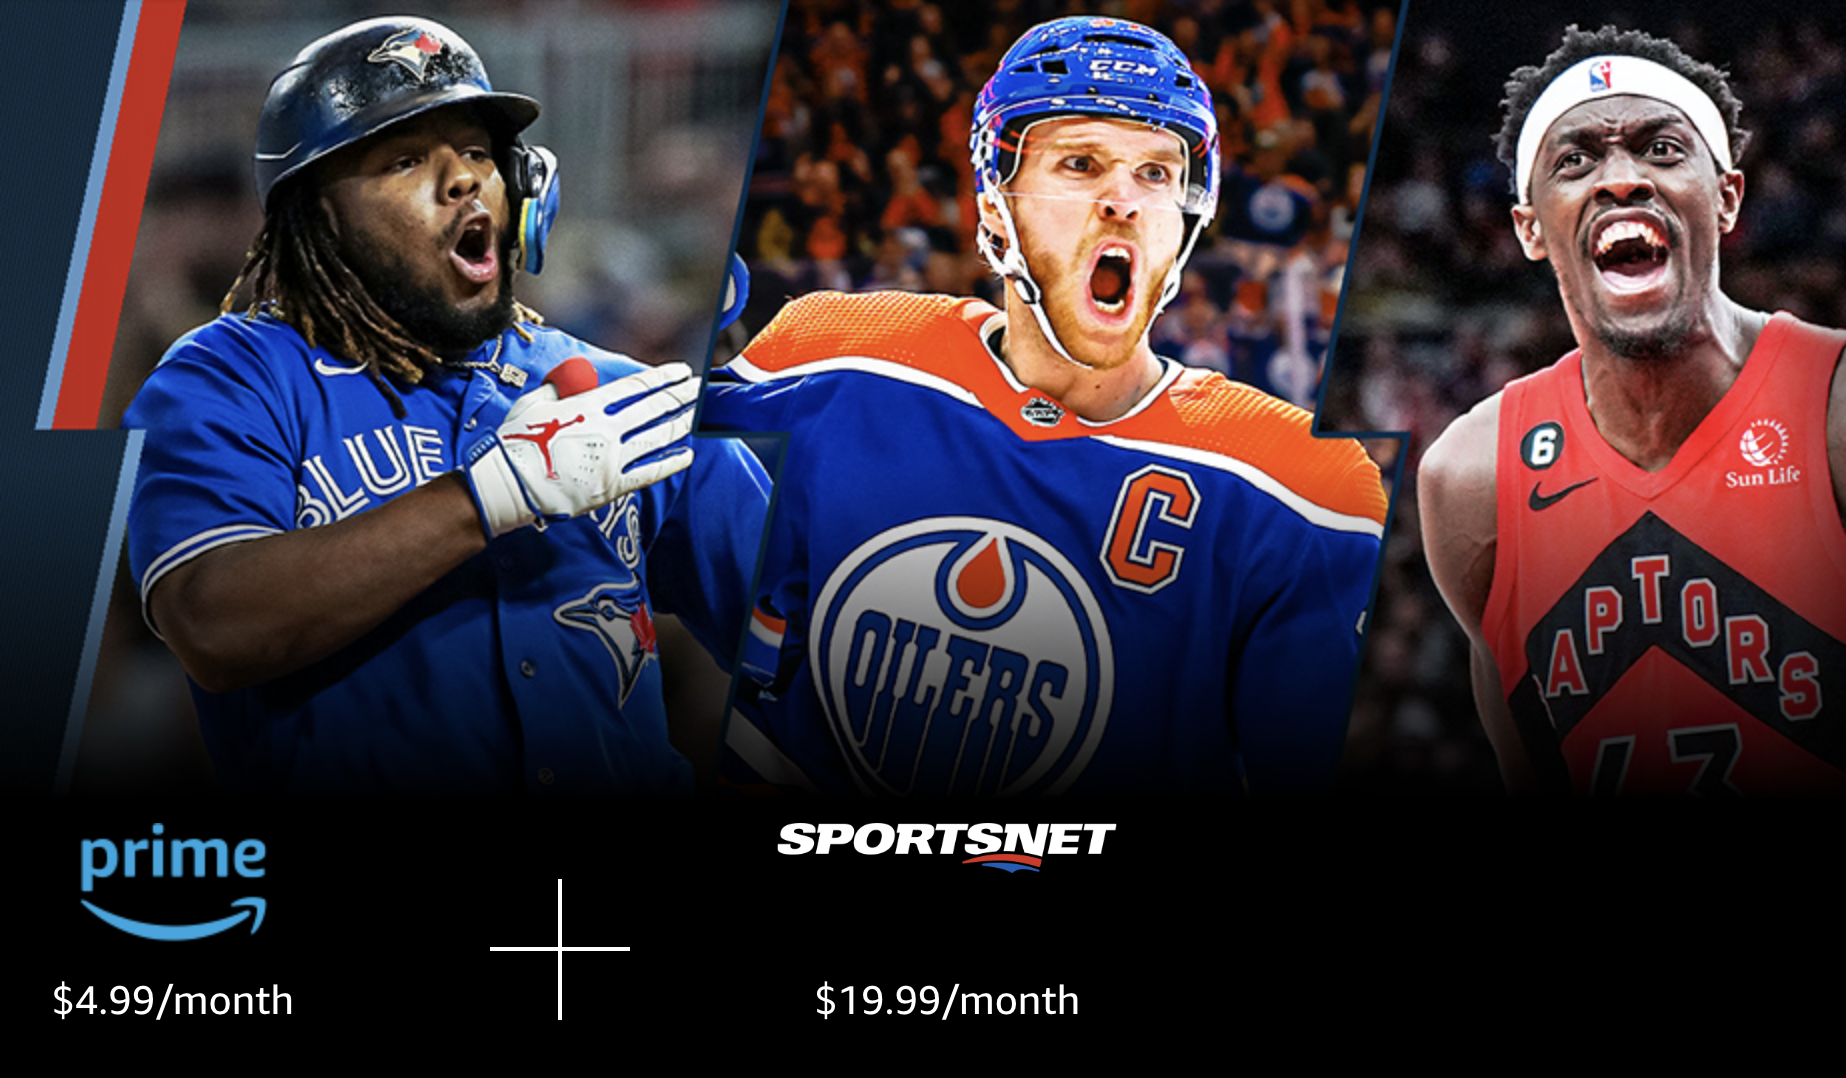 Amazon Prime and Sportsnet banner